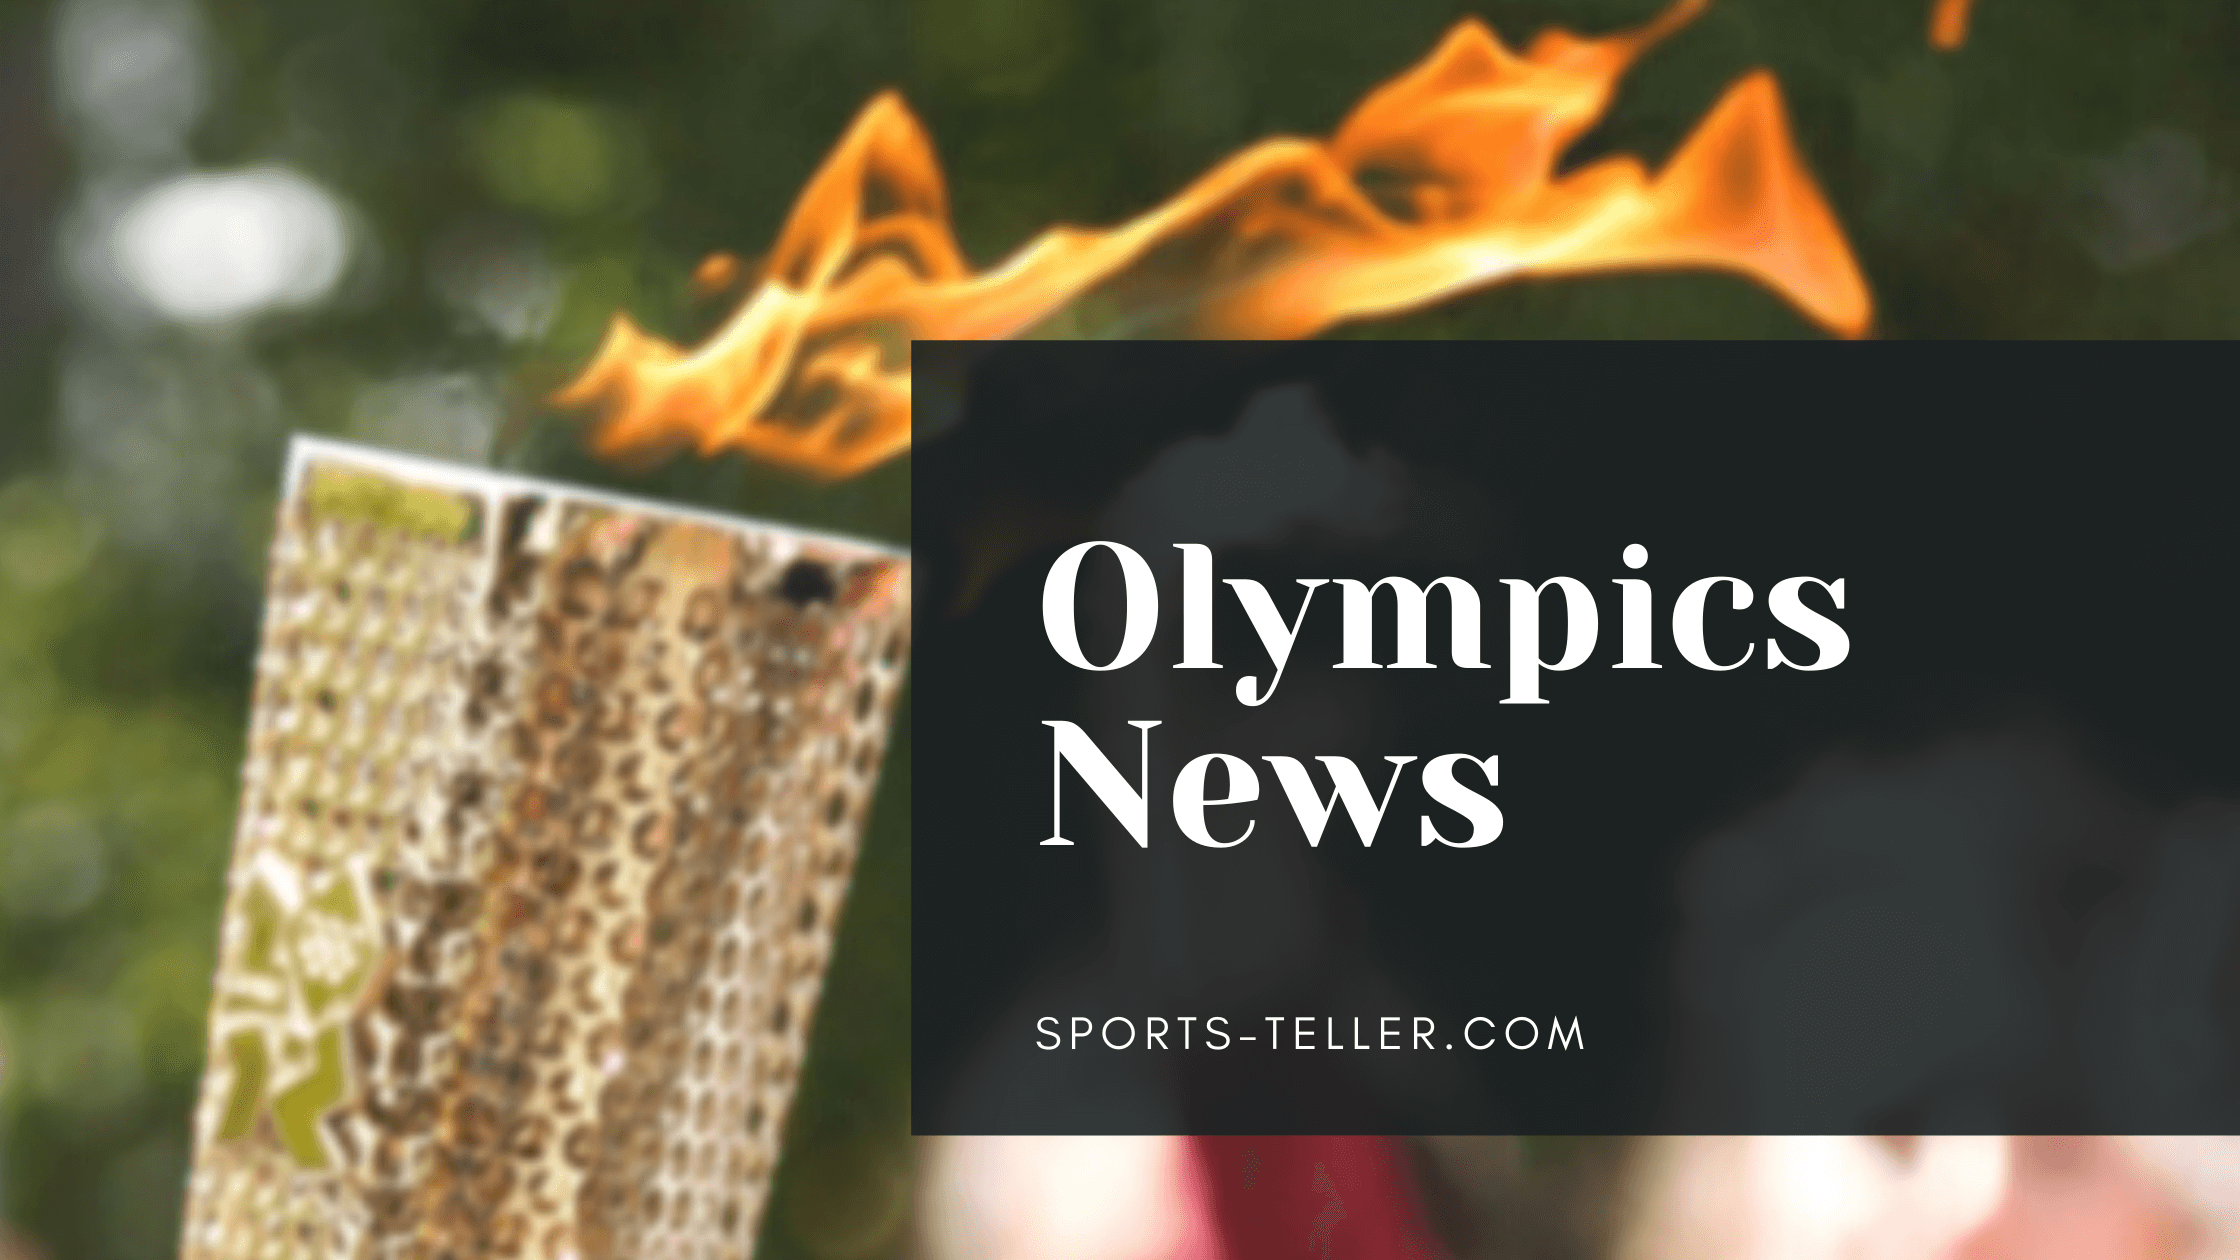 Olympic Sport News Article header image with a lit Olympic torch in the background and "Olympics News, Sports-Teller.com" as a text overlay